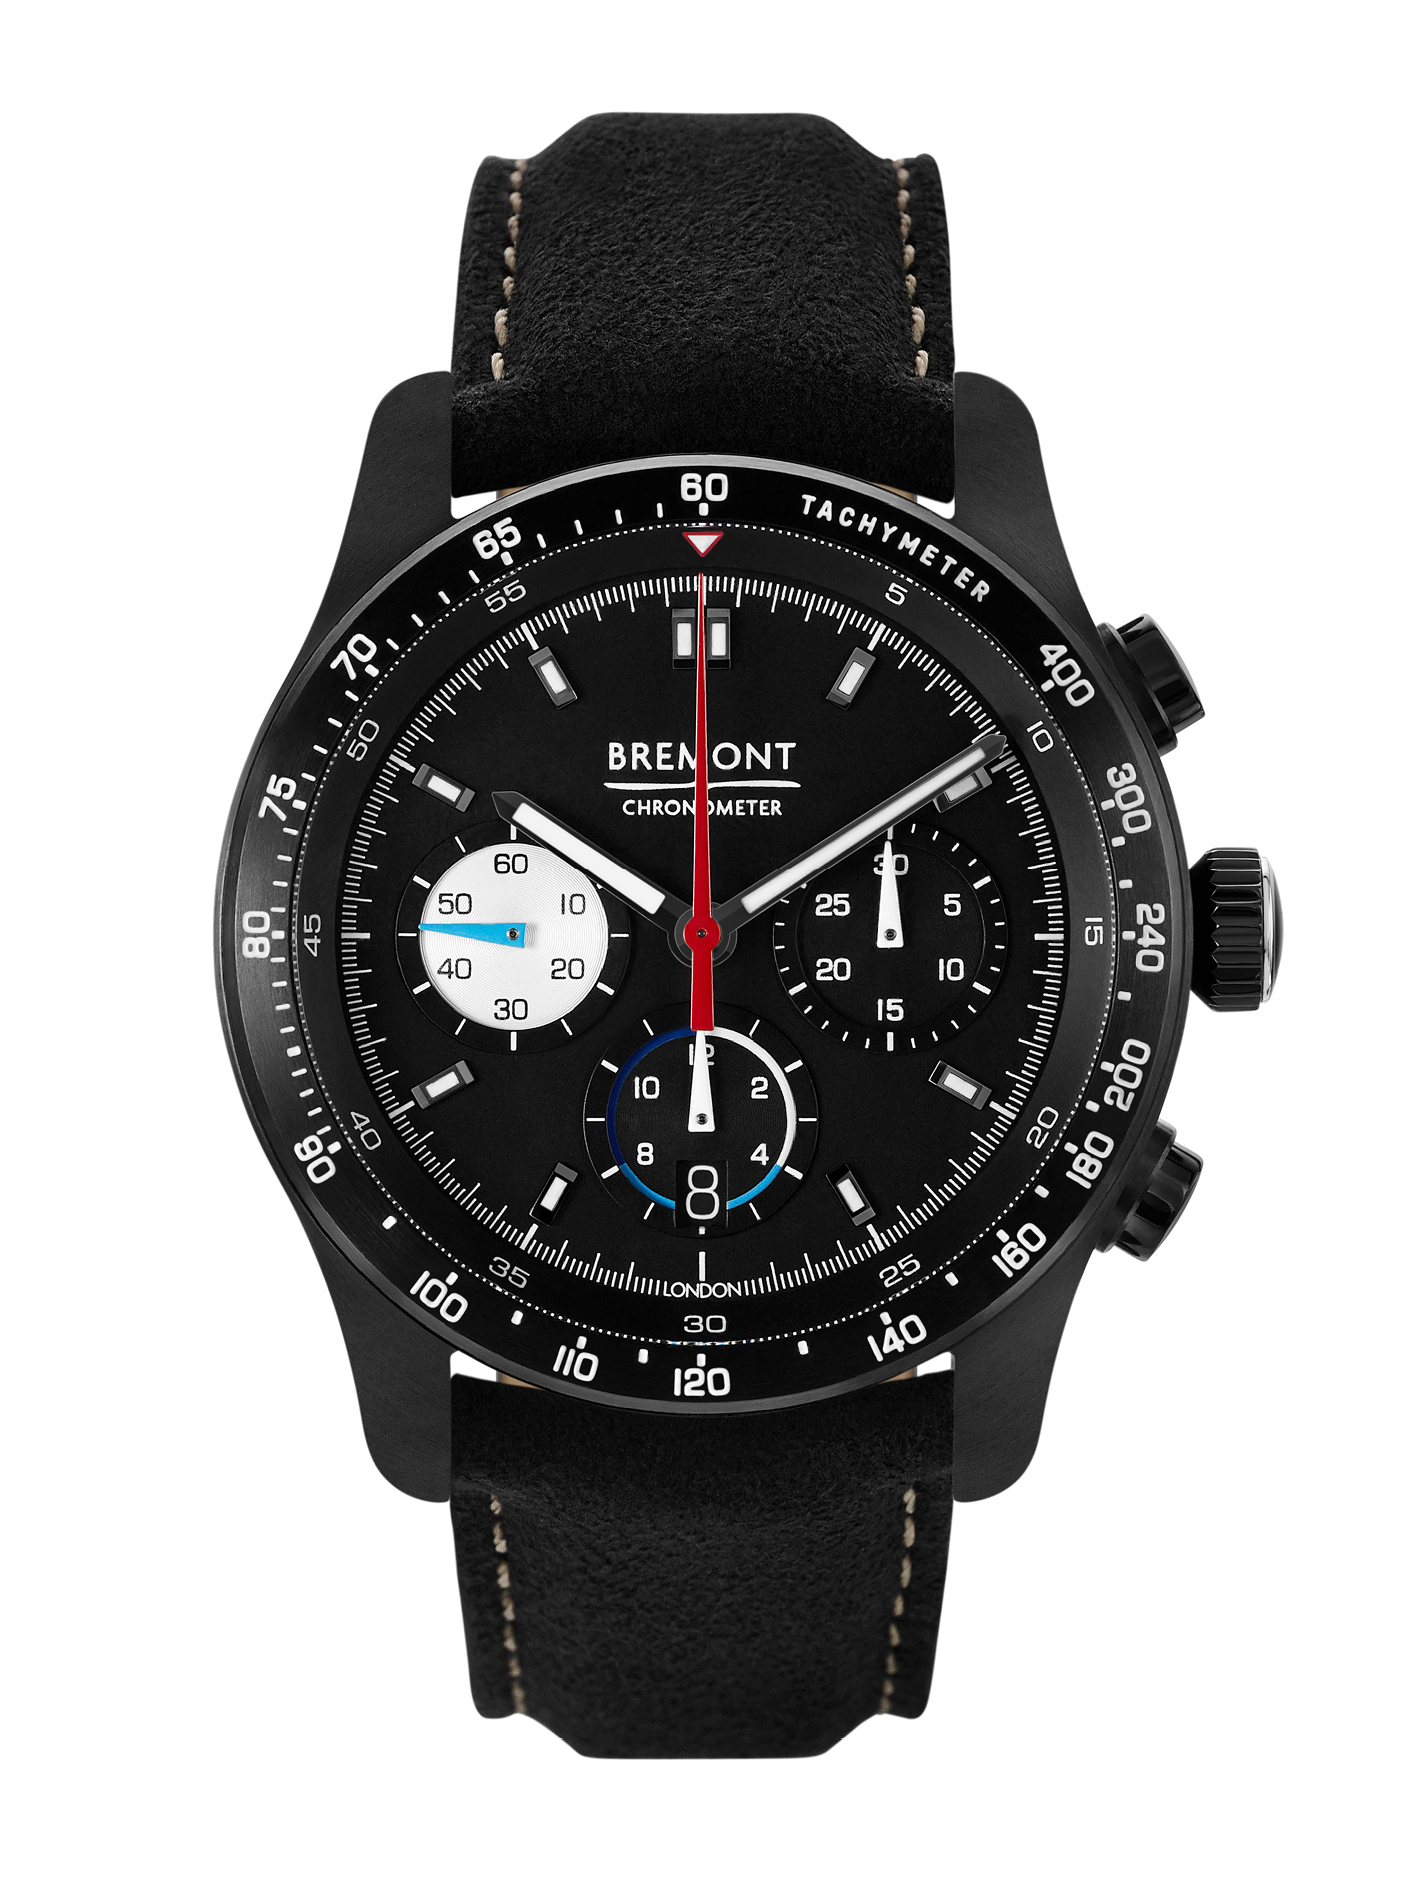 The Bremont WR-45